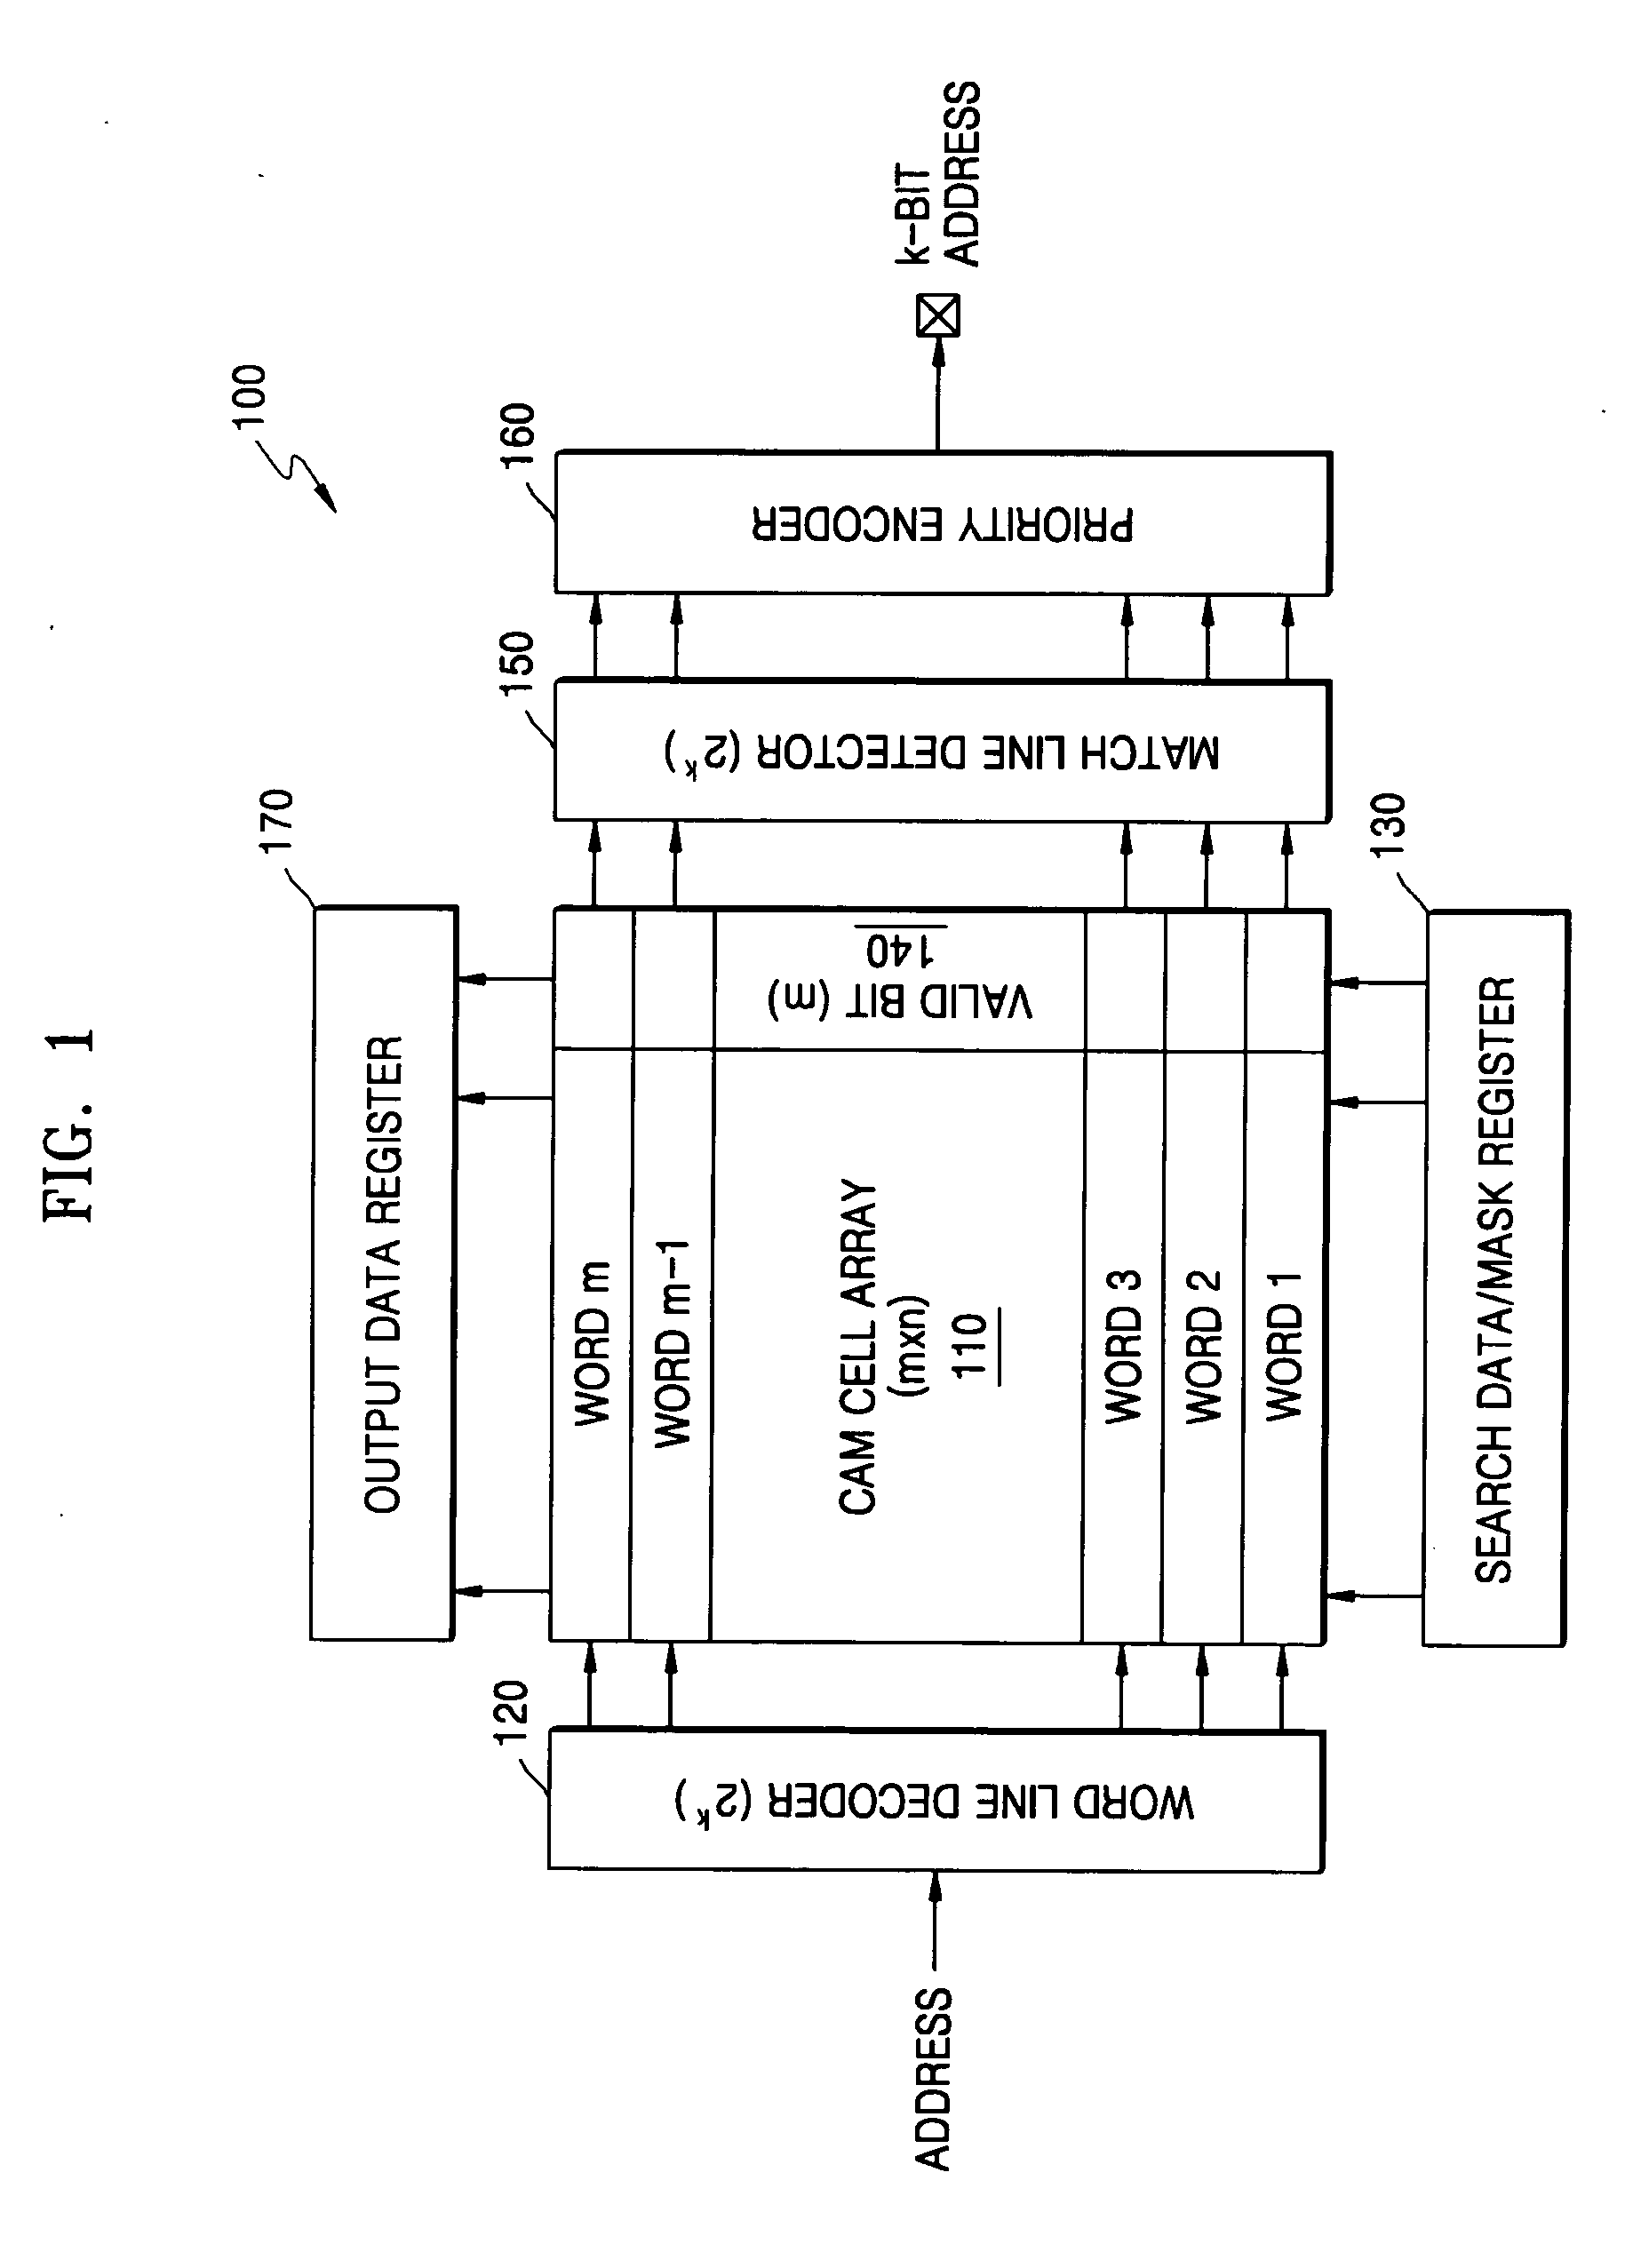 Content addressable memory (CAM) capable of finding errors in a CAM cell array and a method thereof